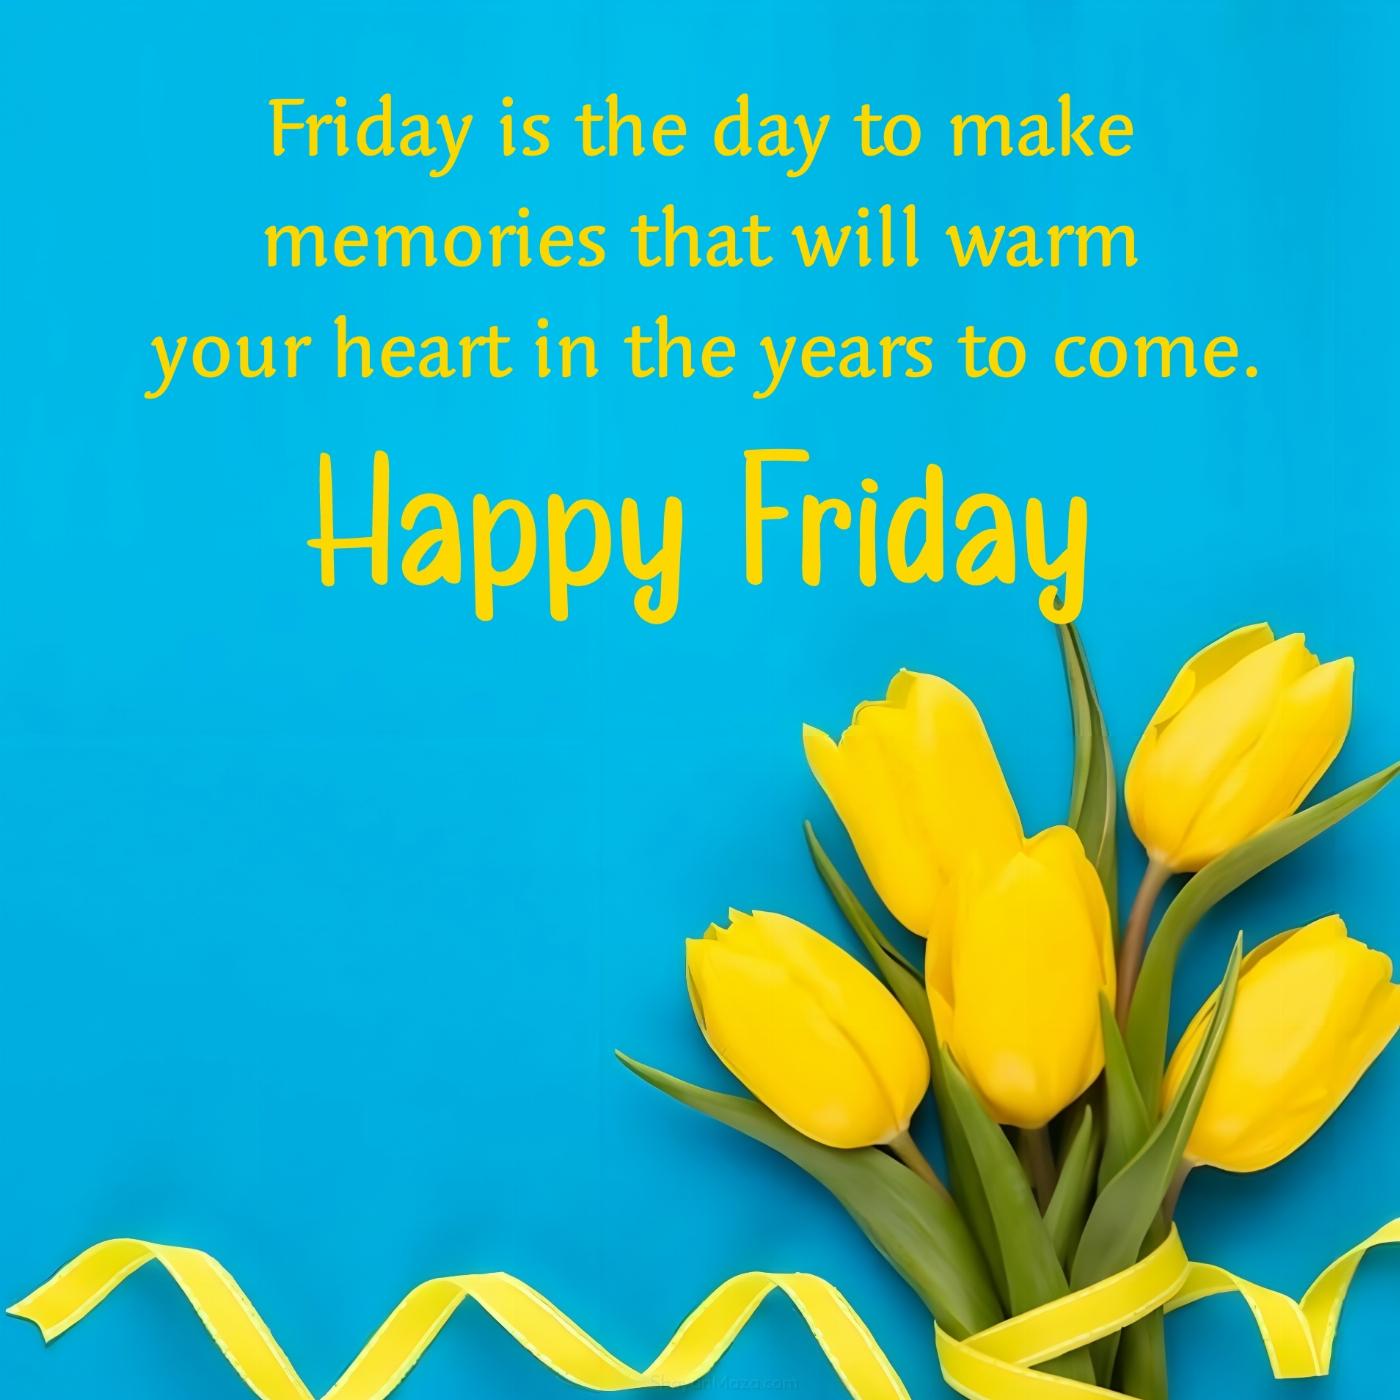 Friday is the day to make memories that will warm your heart